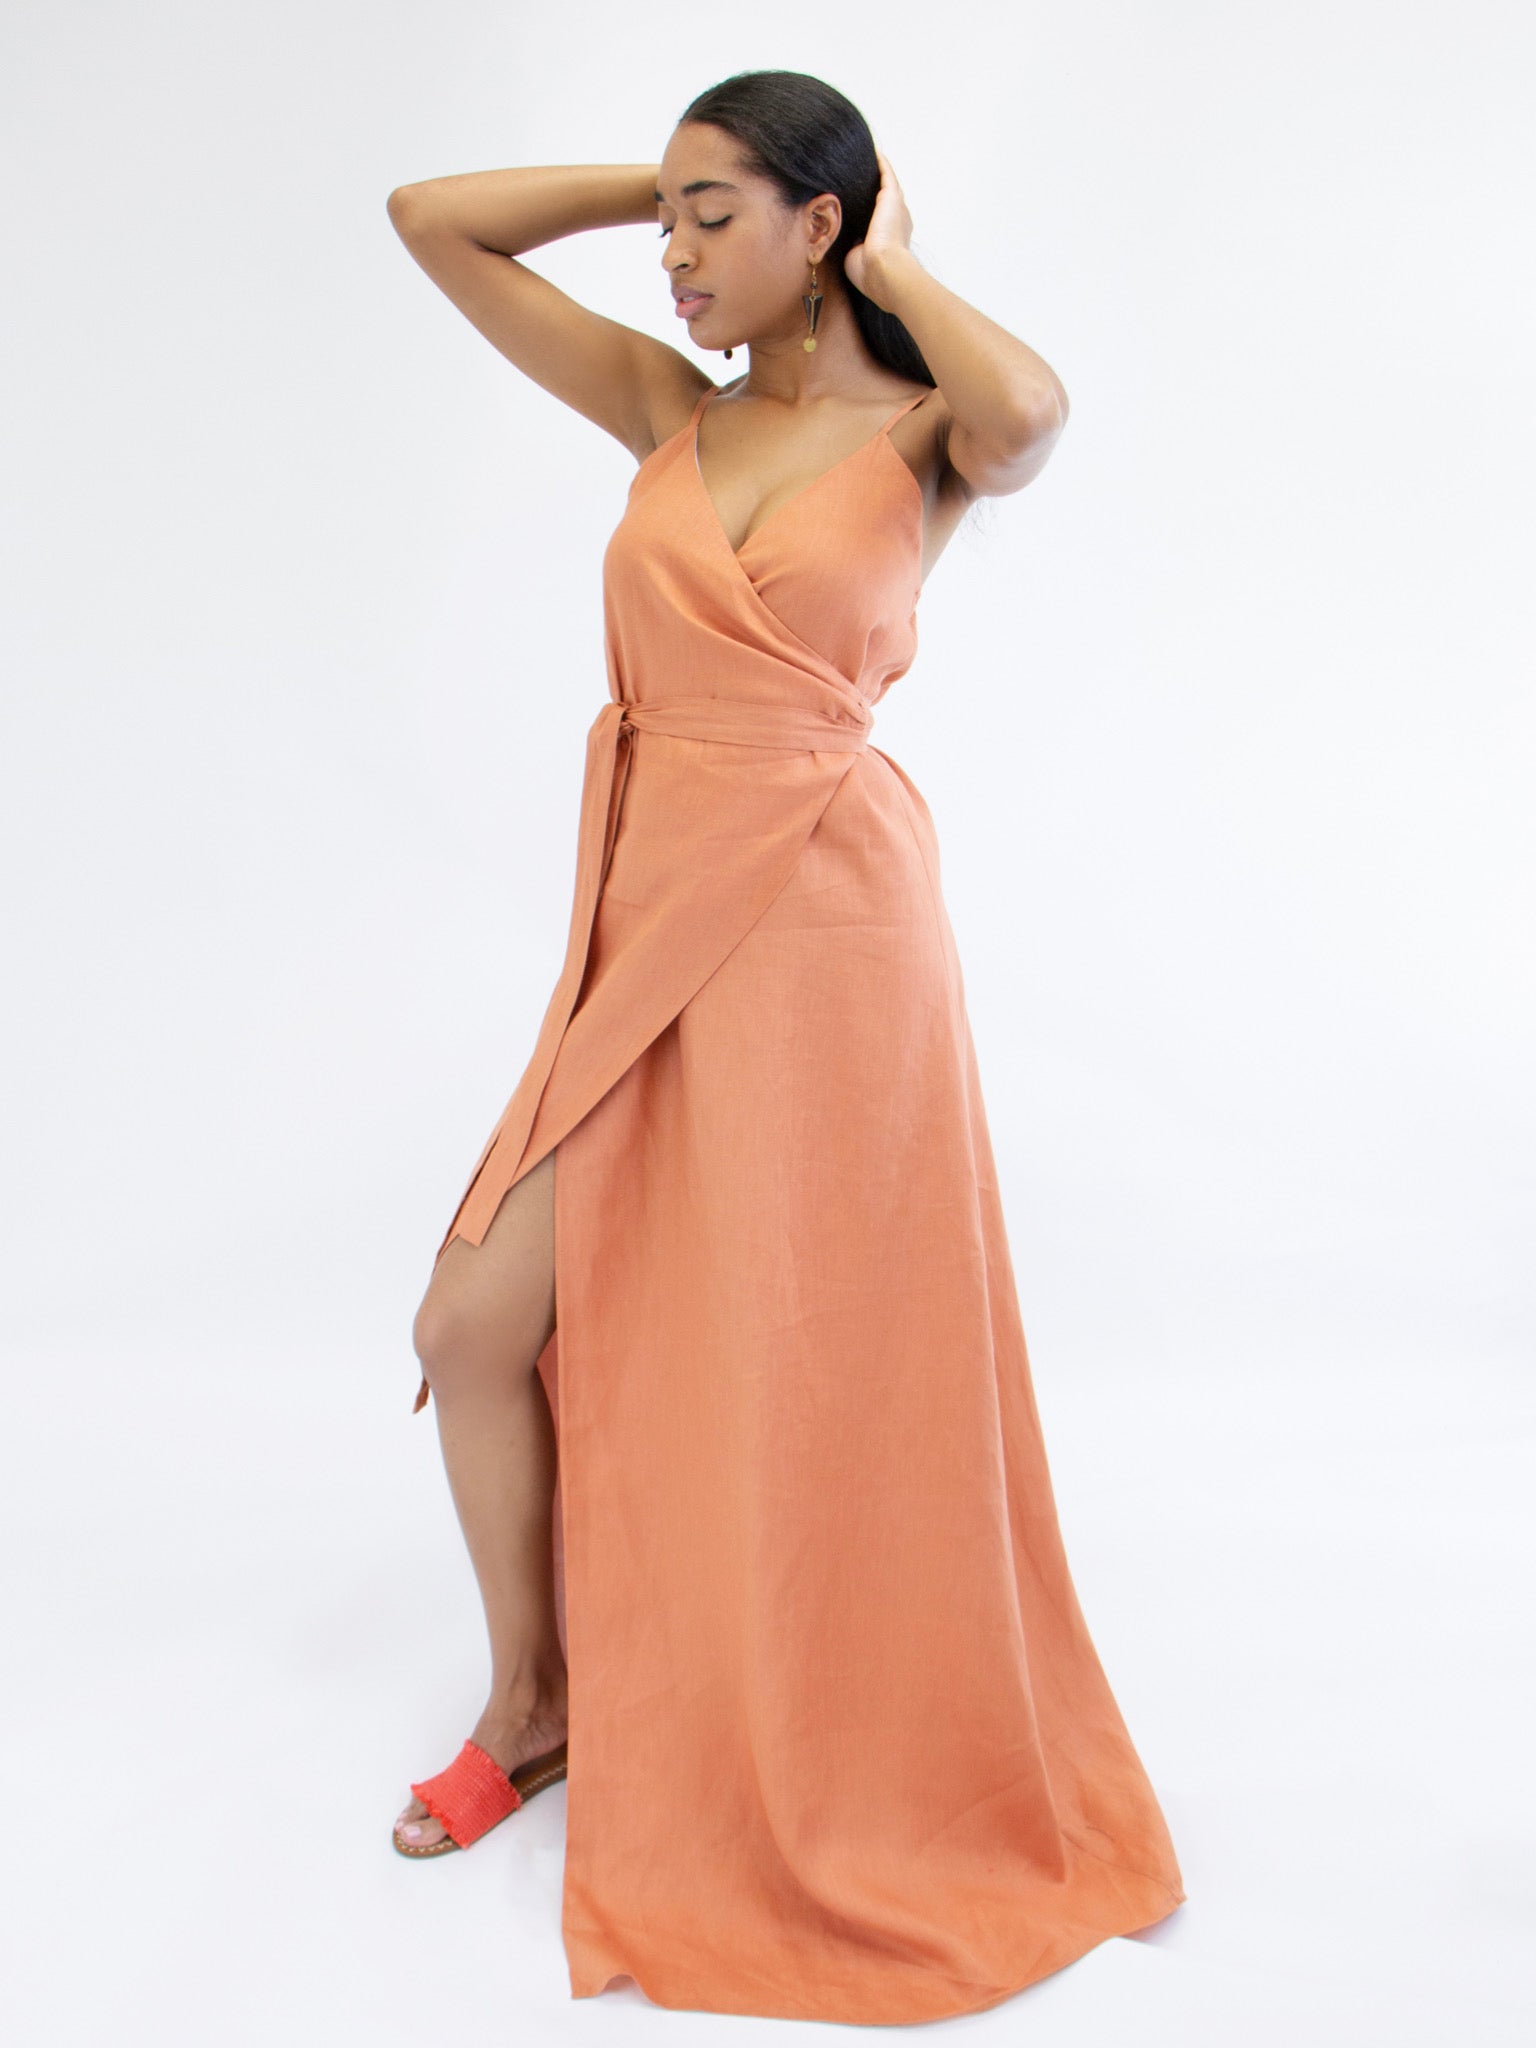 Coco Point Wrap Dress in Marmalade